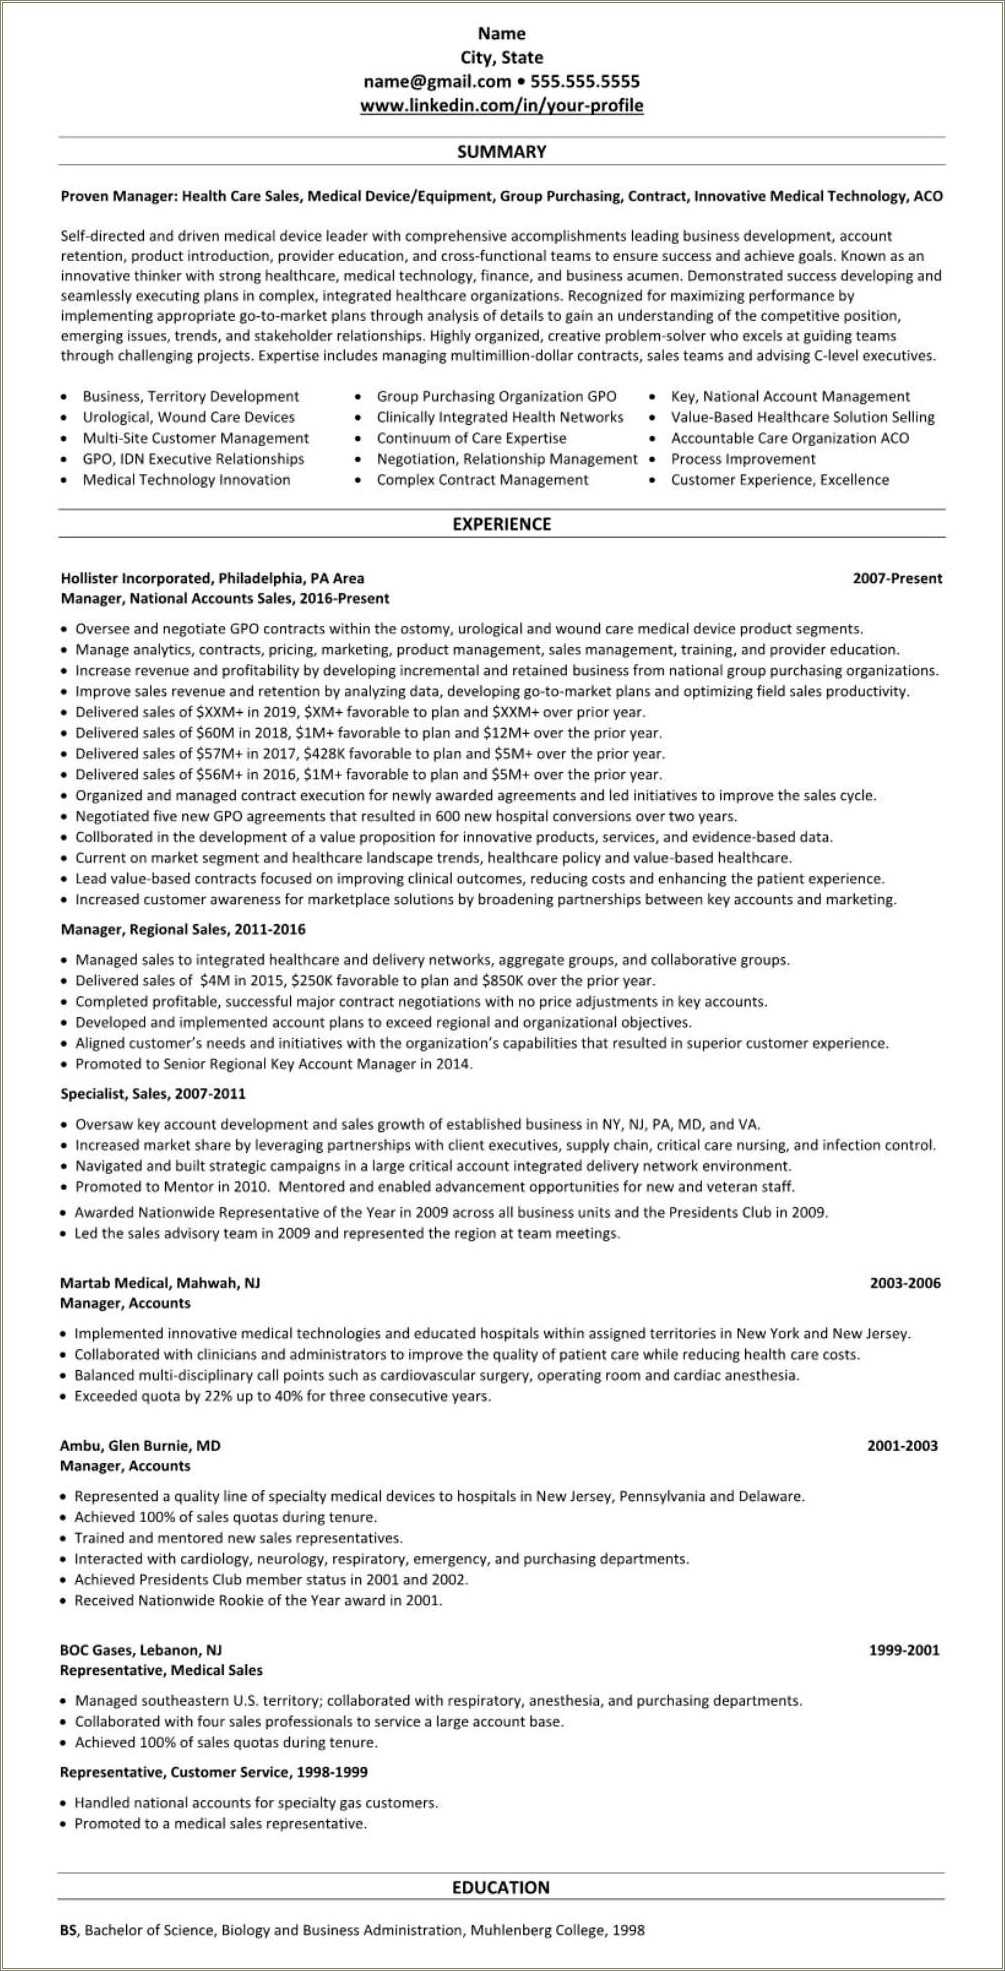 Ceo Medical Device Resume Example